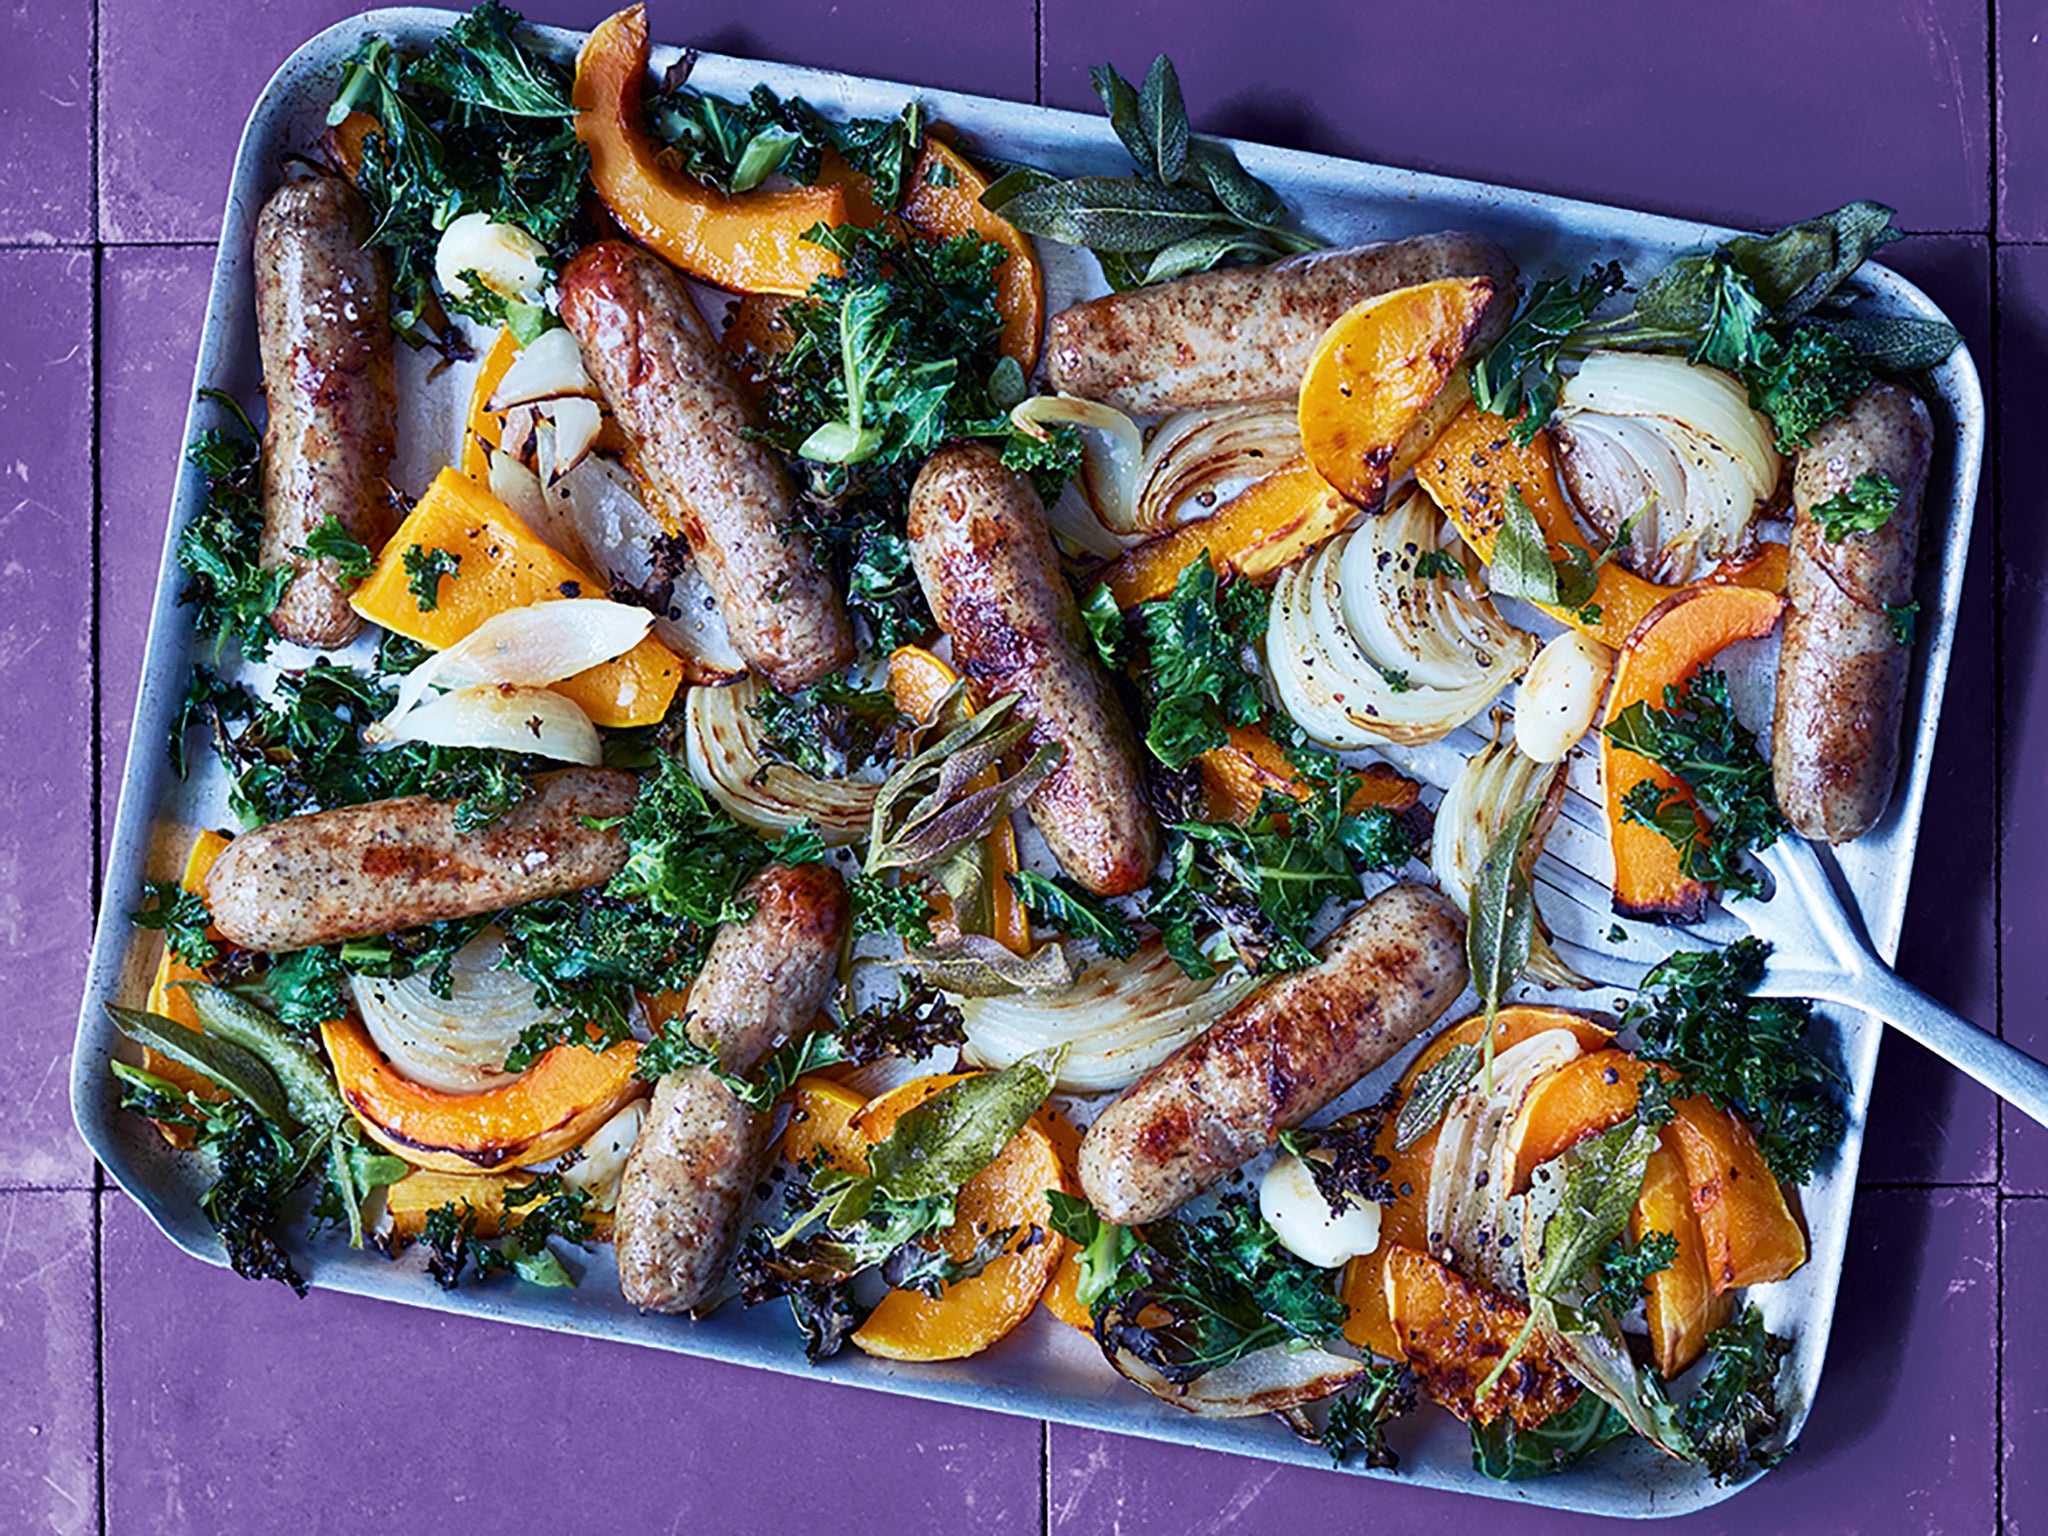 While you’re cooking this warming, family friendy traybake, get started on tomorrow’s prep